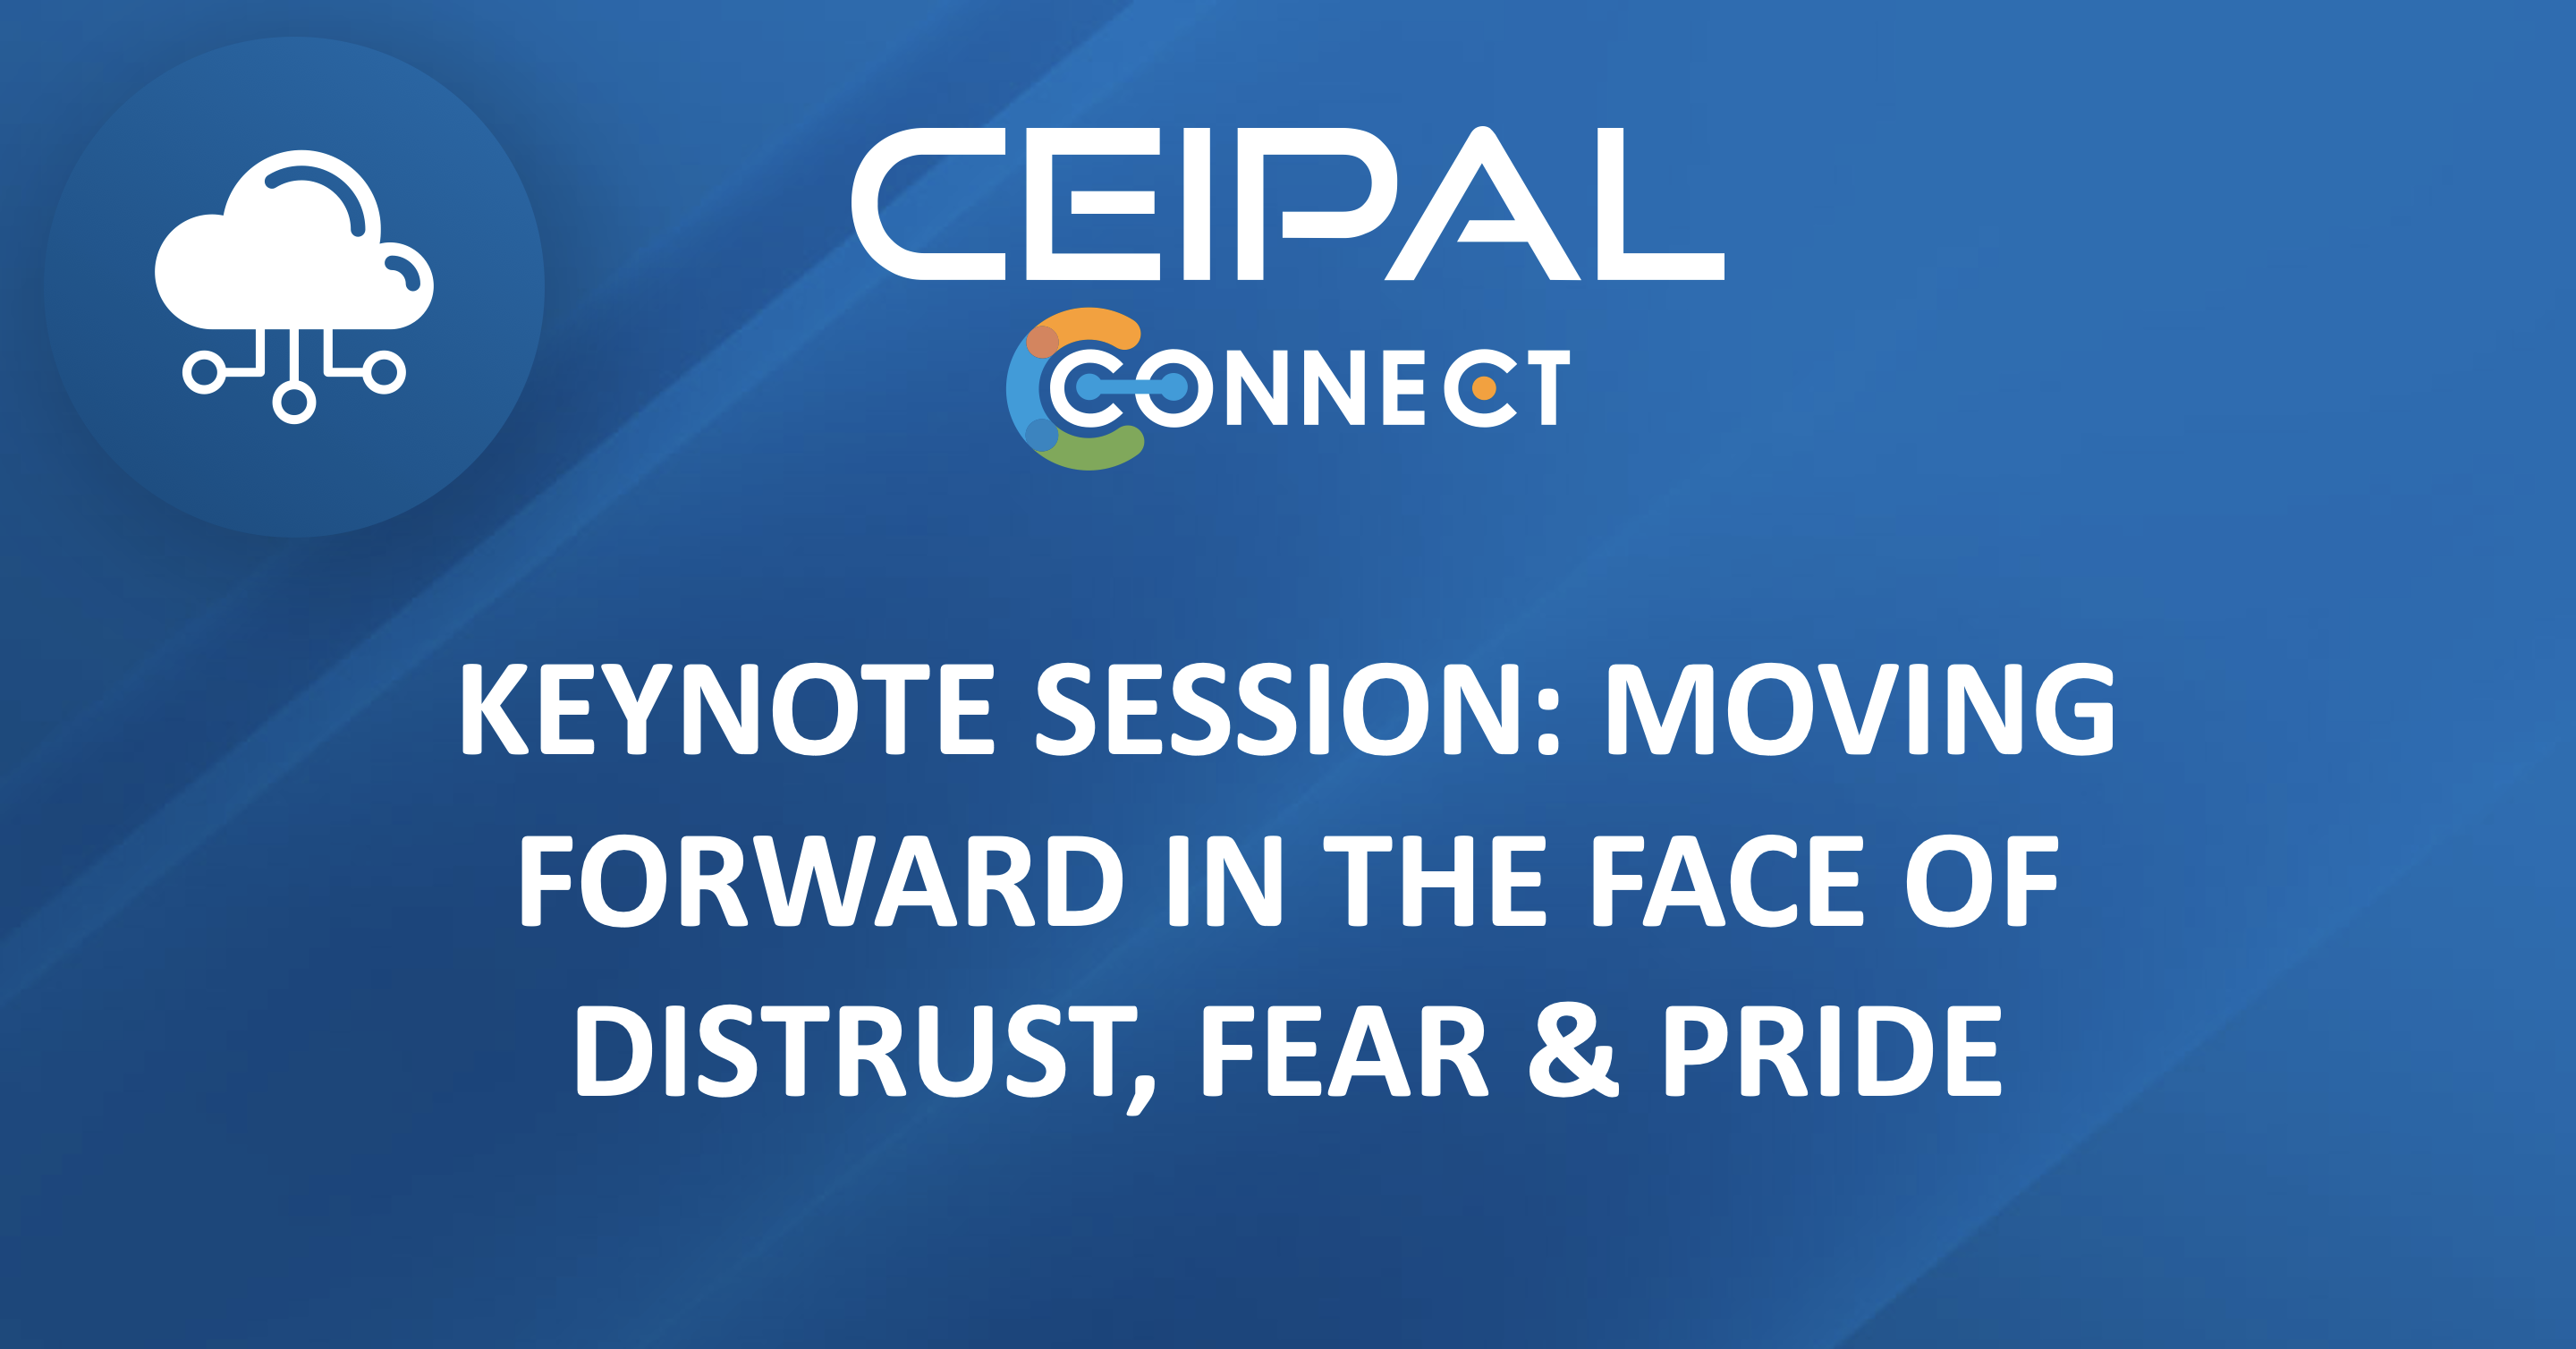 Keynote Session: Moving Forward in the Face of Distrust, Fear & Pride